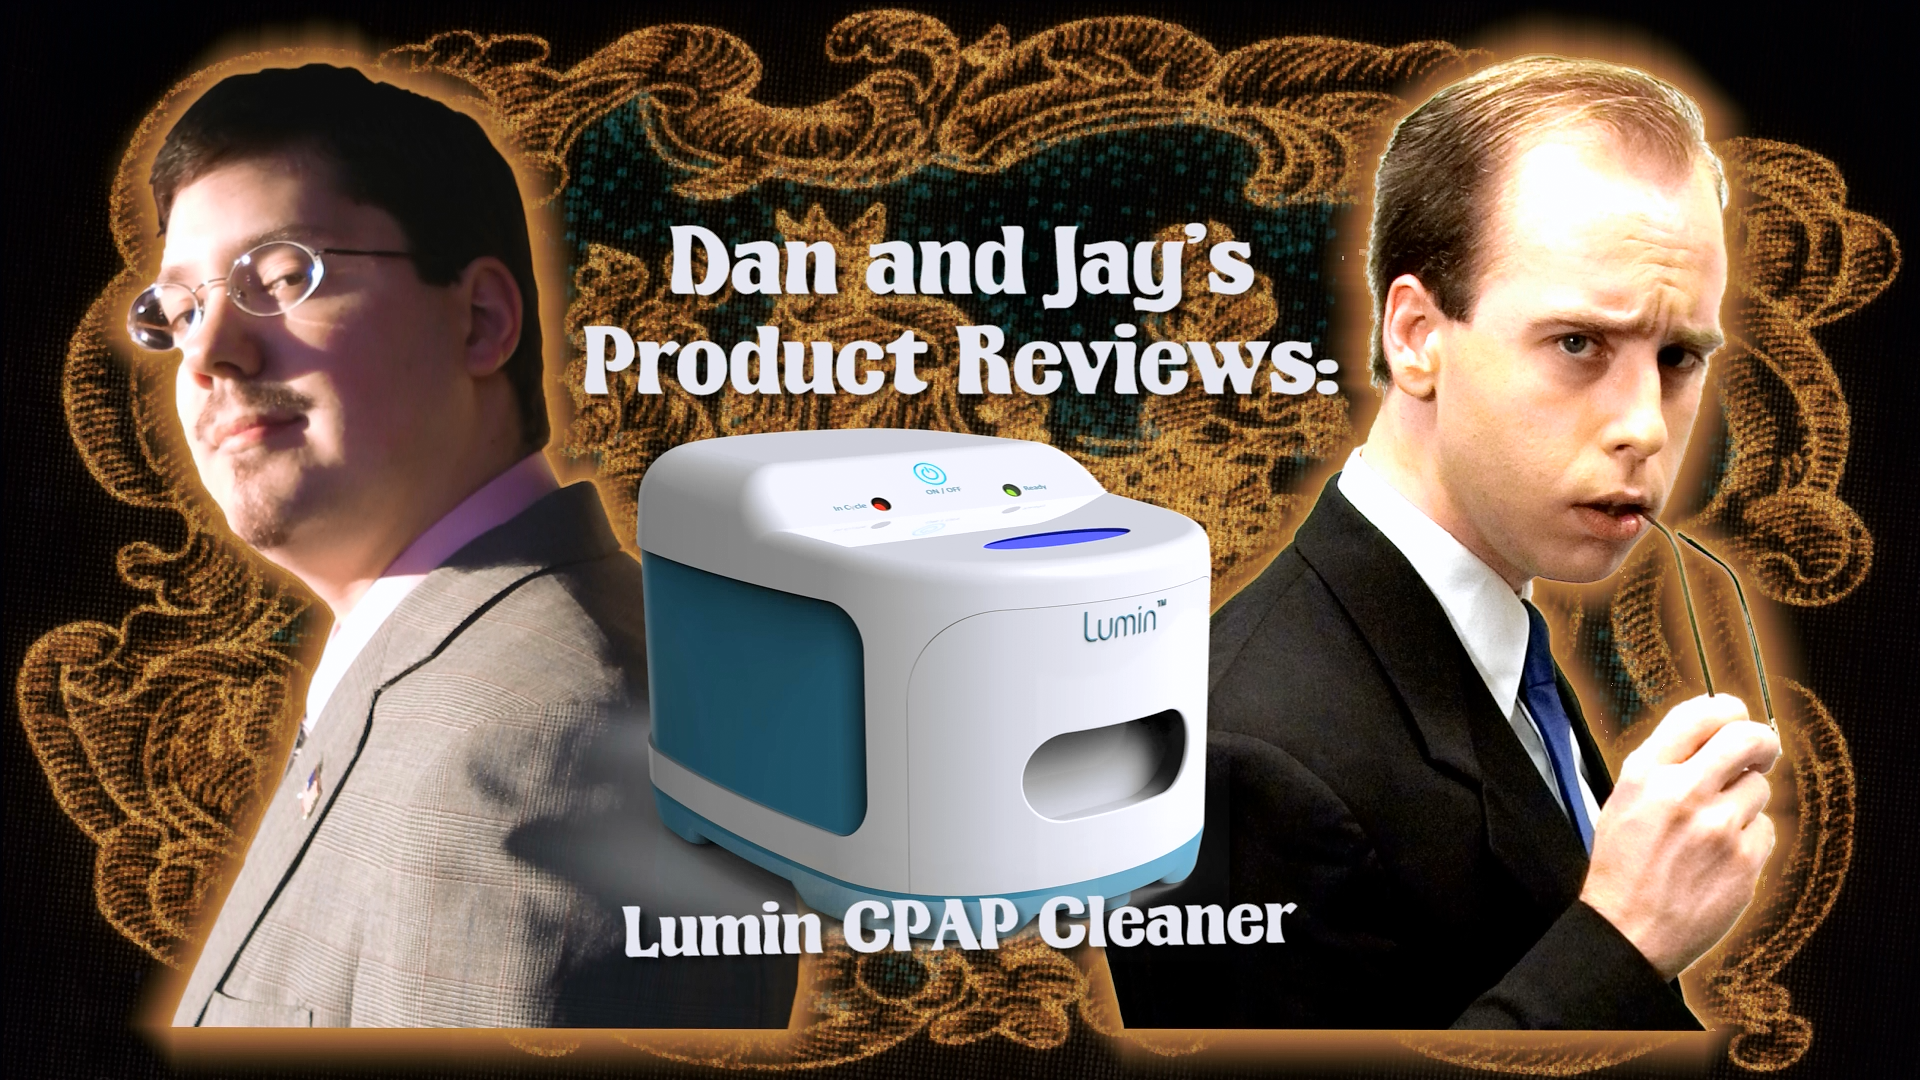 Dan and Jay’s Product Reviews 1 – The Lumin CPAP Cleaner